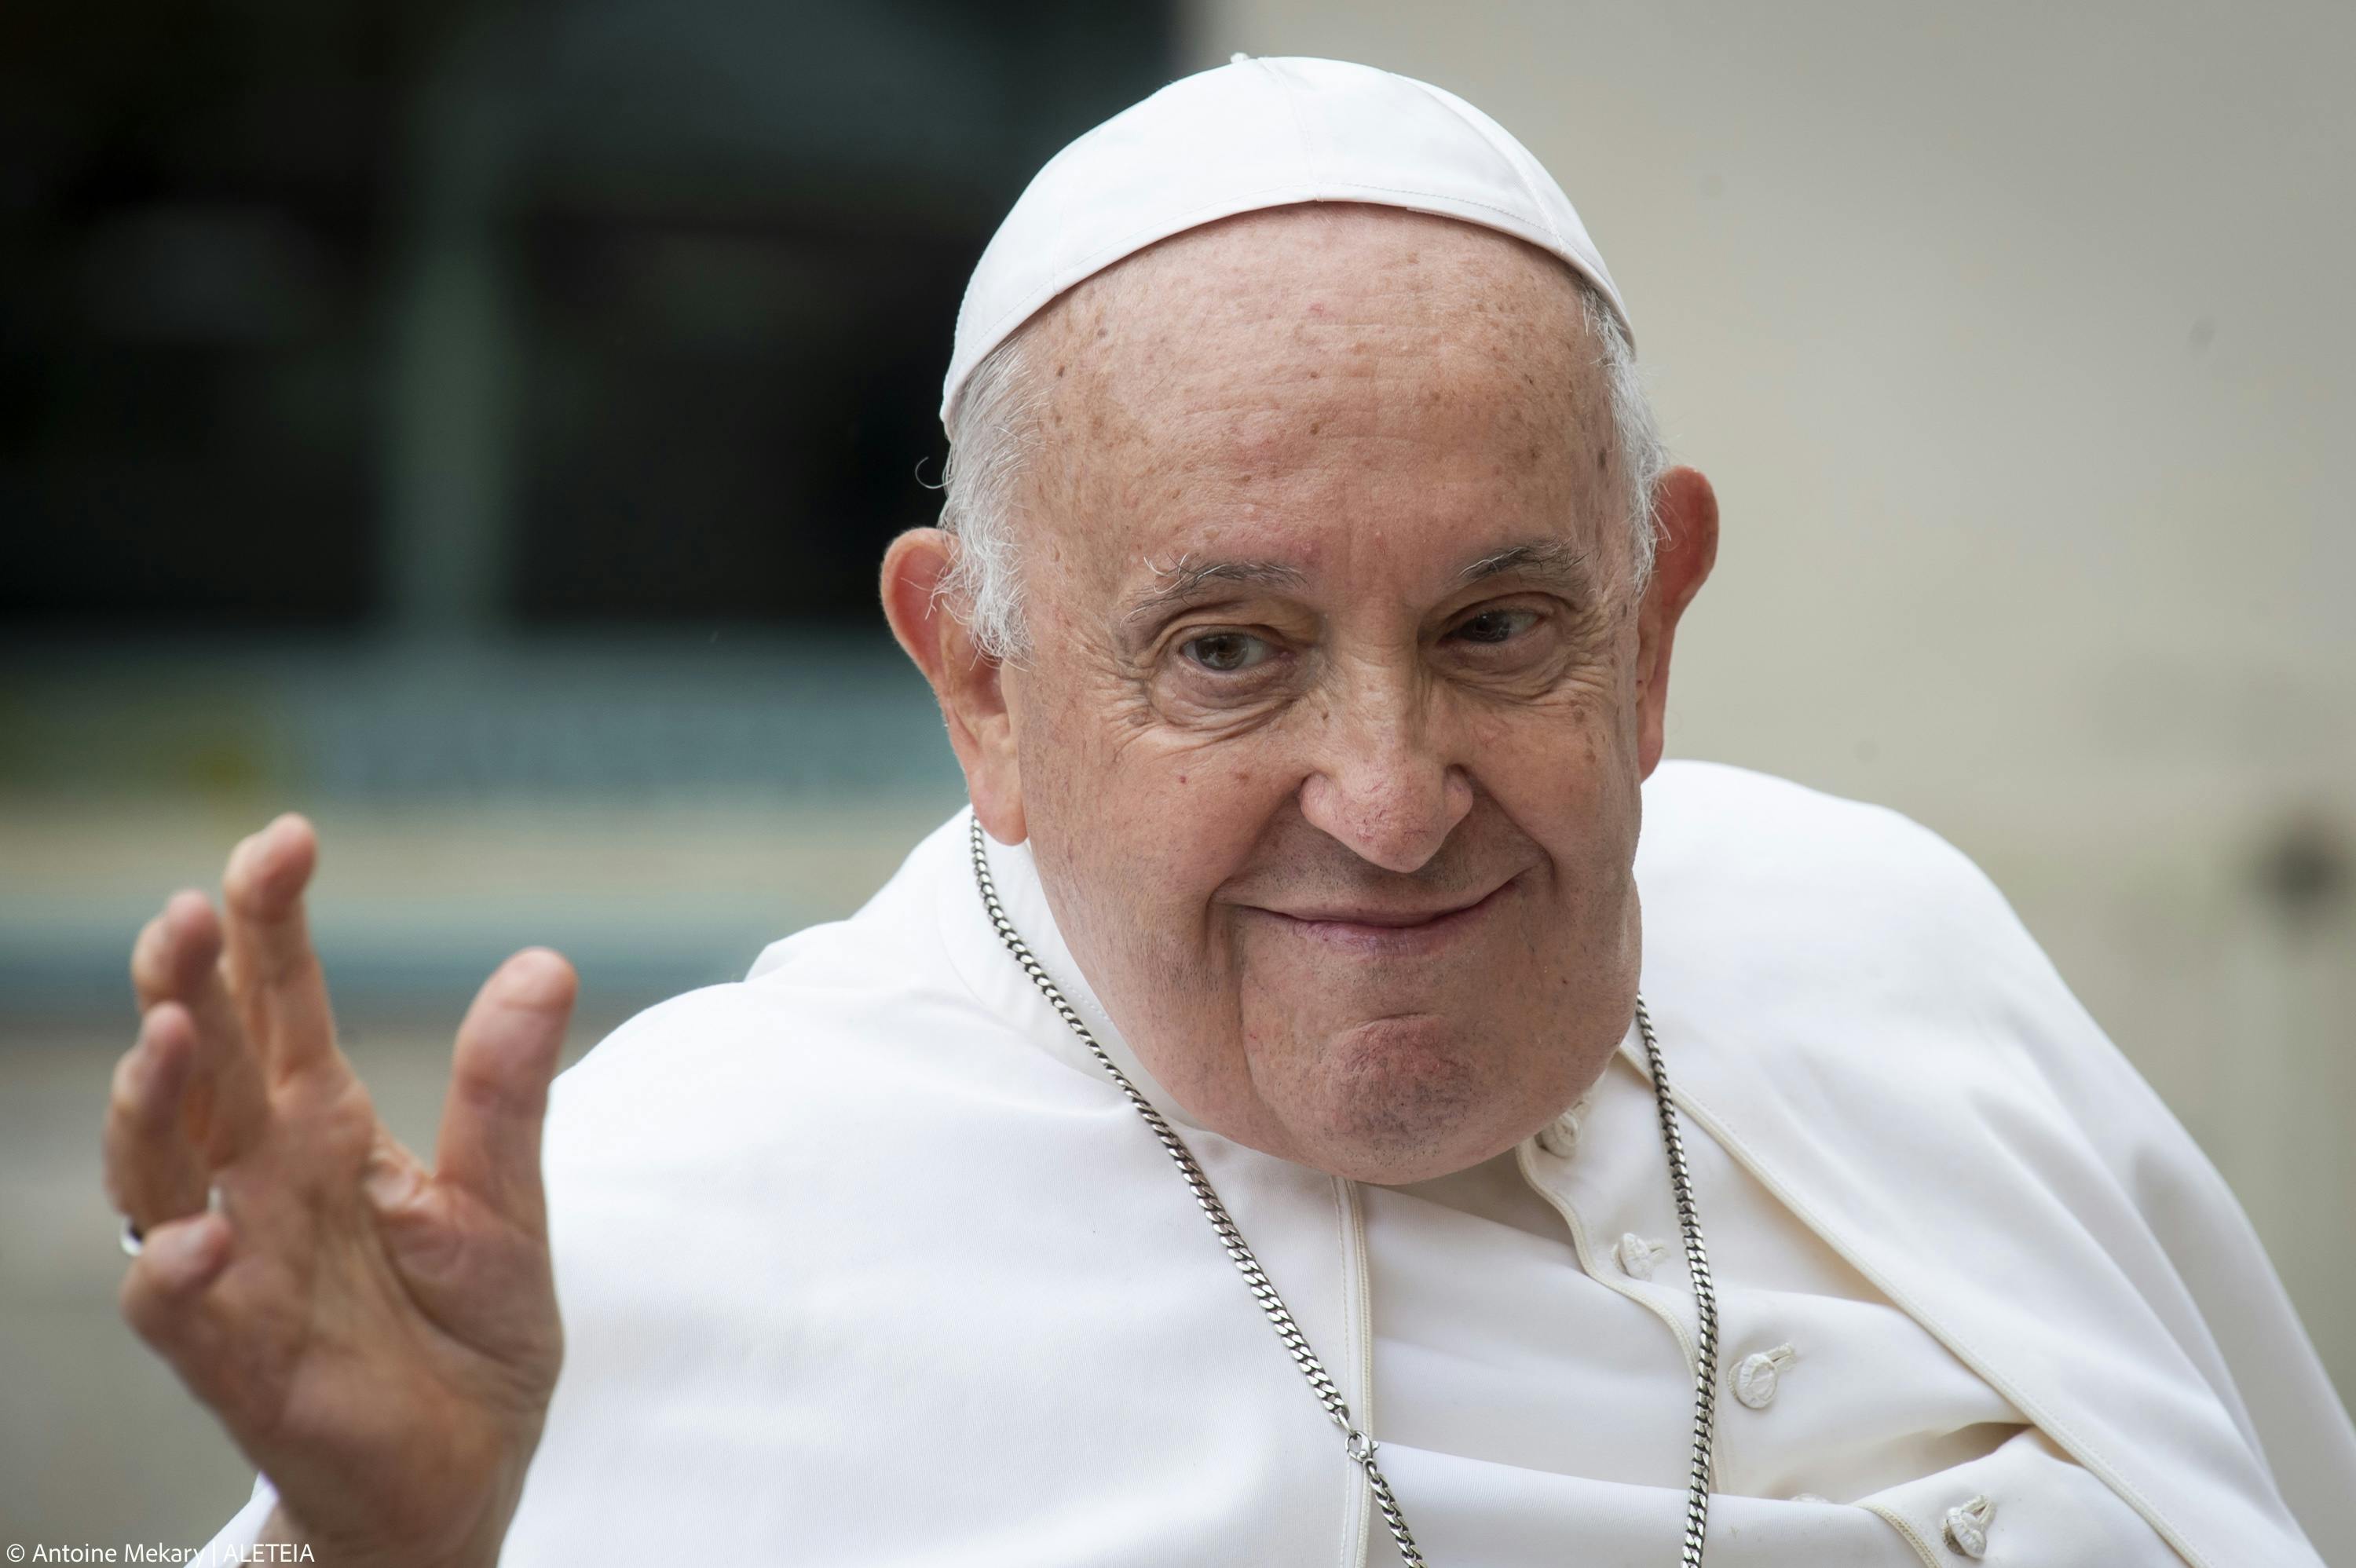 Pope: To be a pastor one first needs to be a deacon